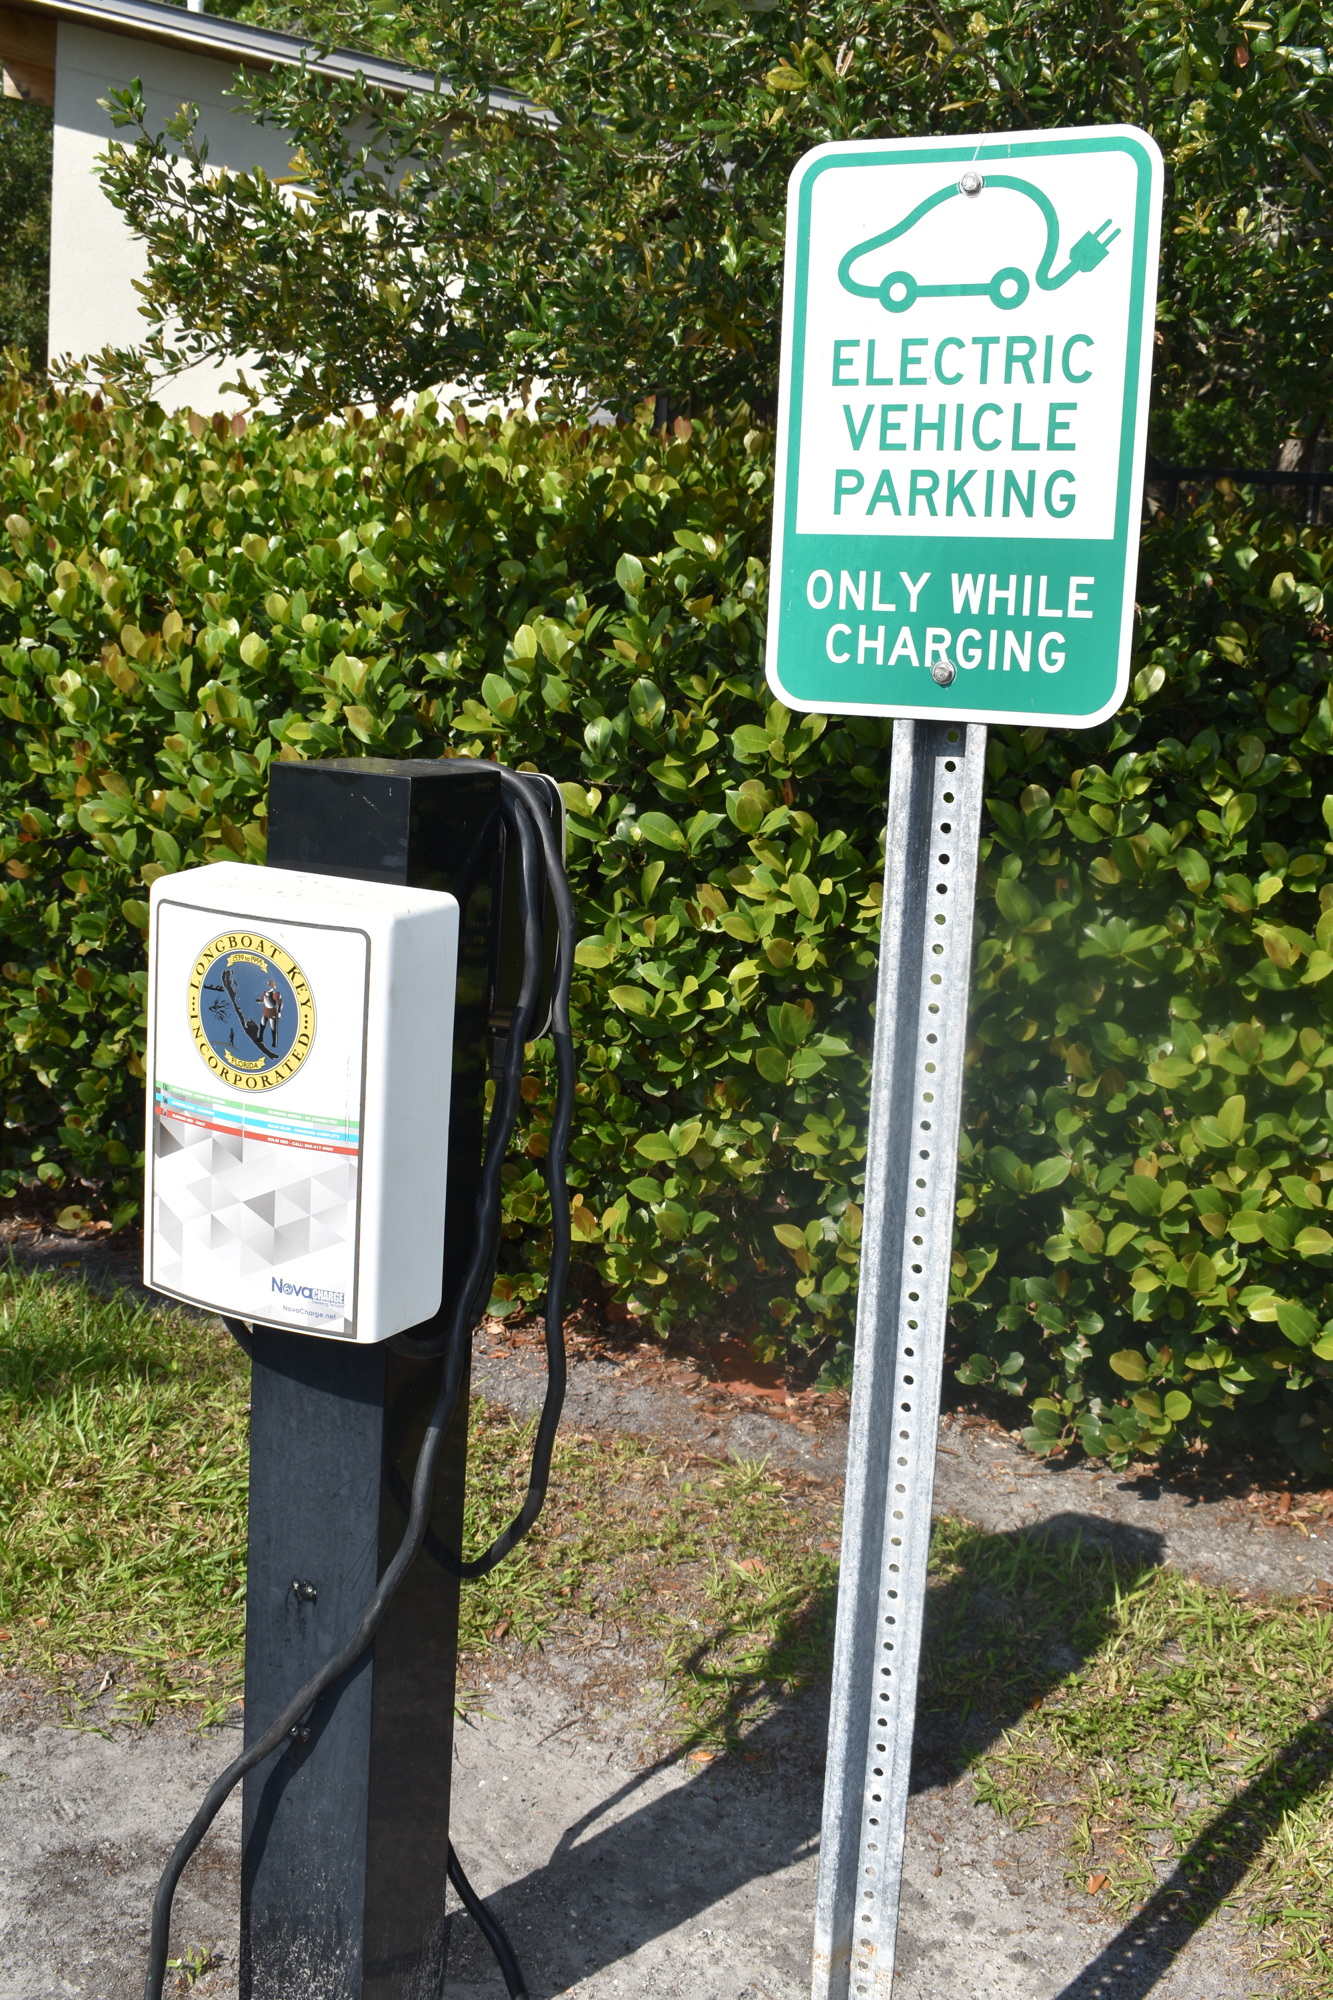 Longboat Key's Bayfront Park offers one Level 2 electric vehicle charging station.